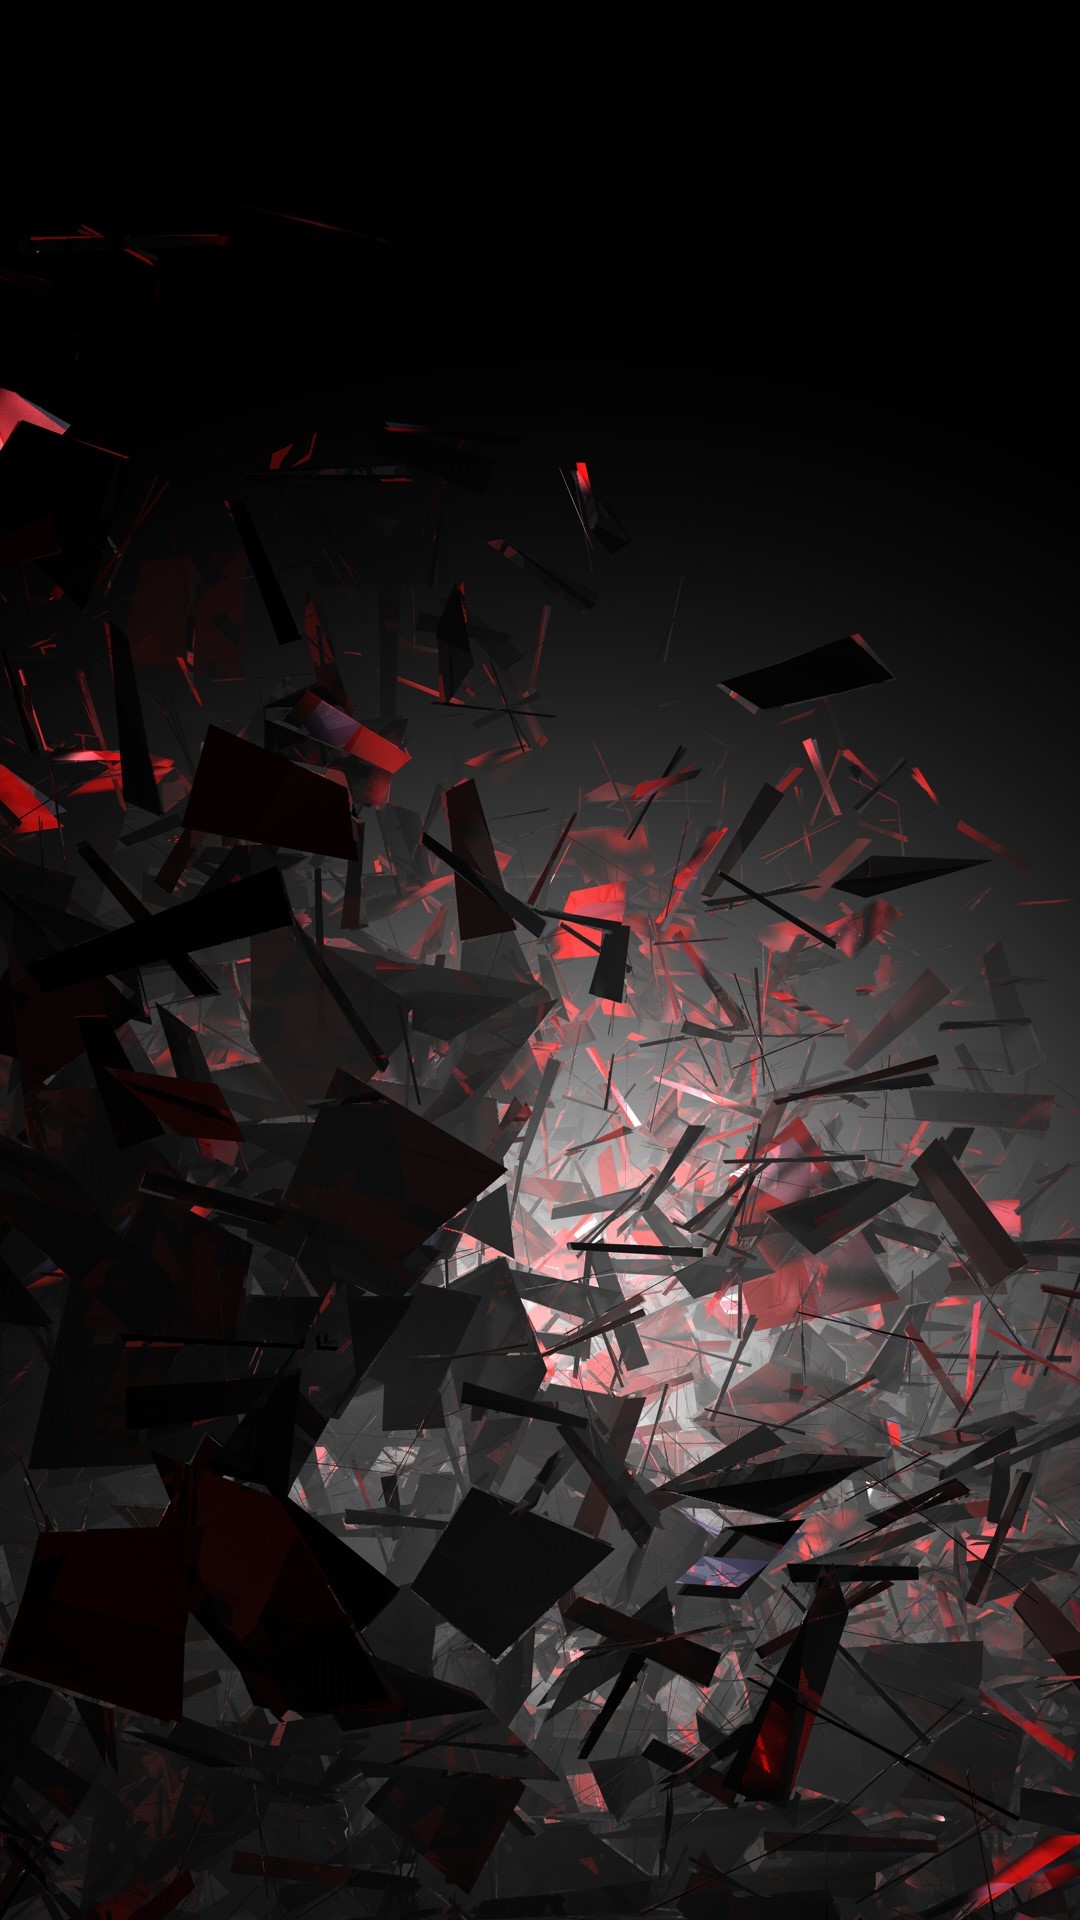 Abstract iPhone X Wallpaper 3D resolution 1080x1920